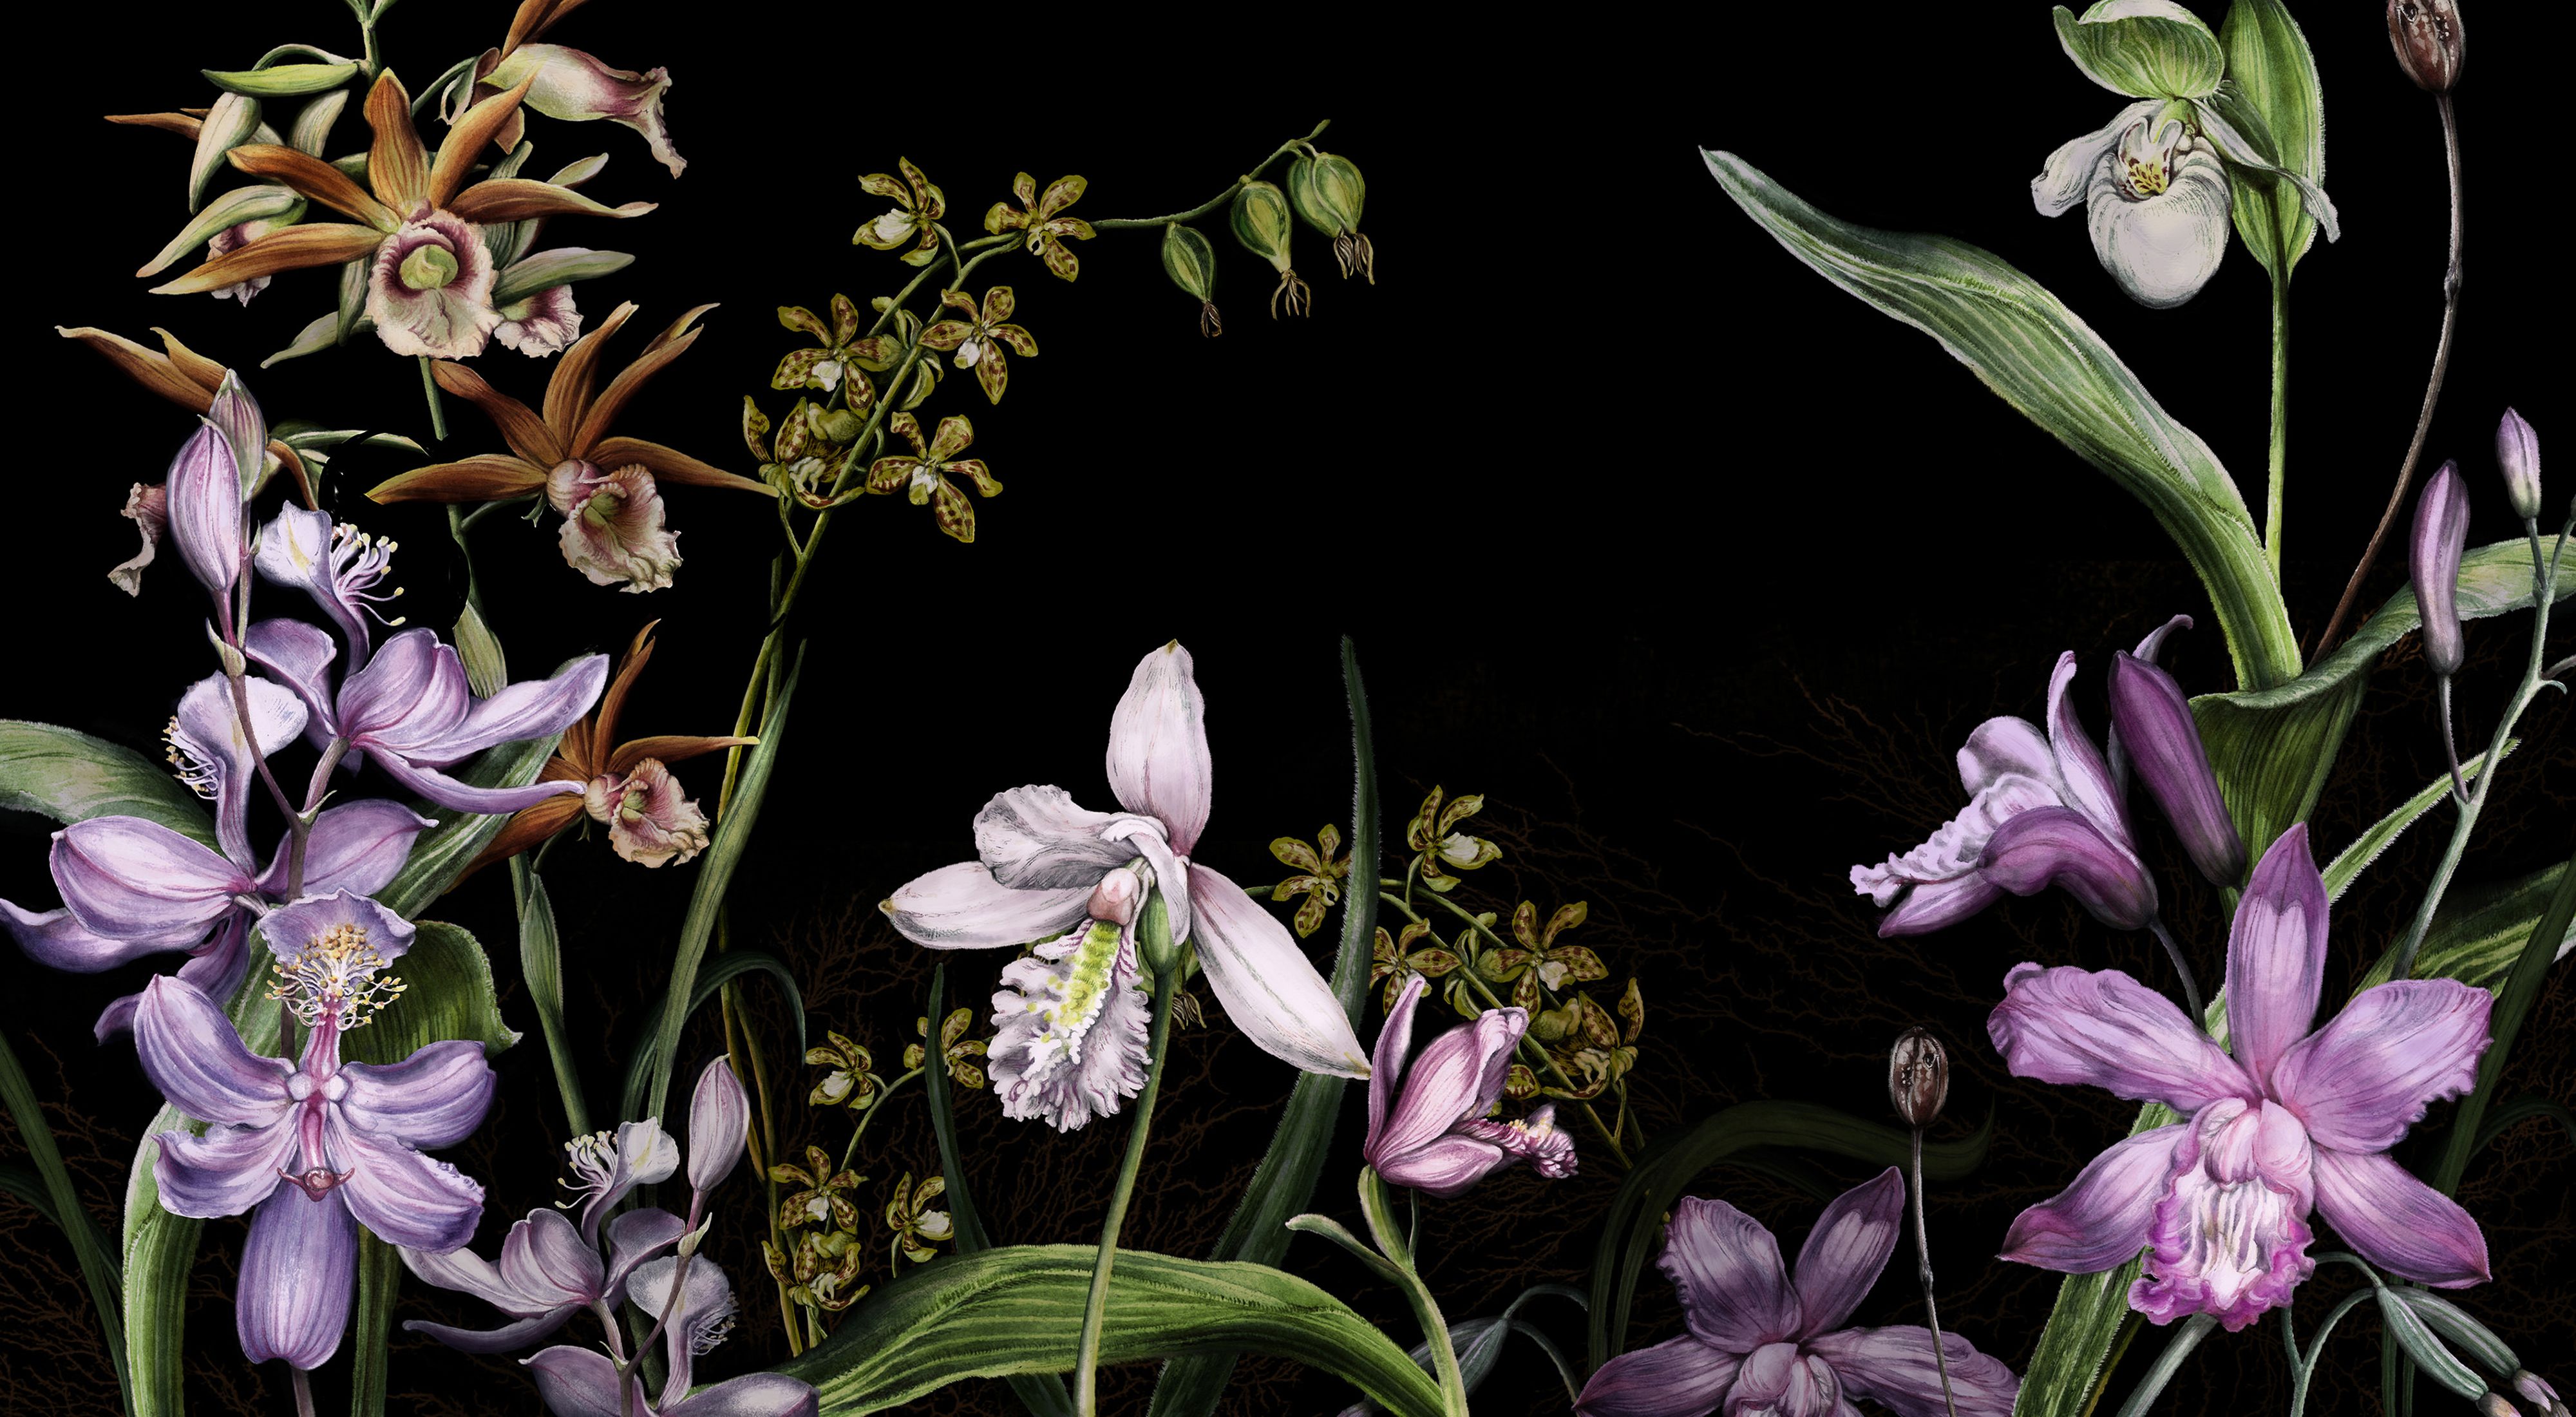 A color illustration of multiple species of orchids against a black background